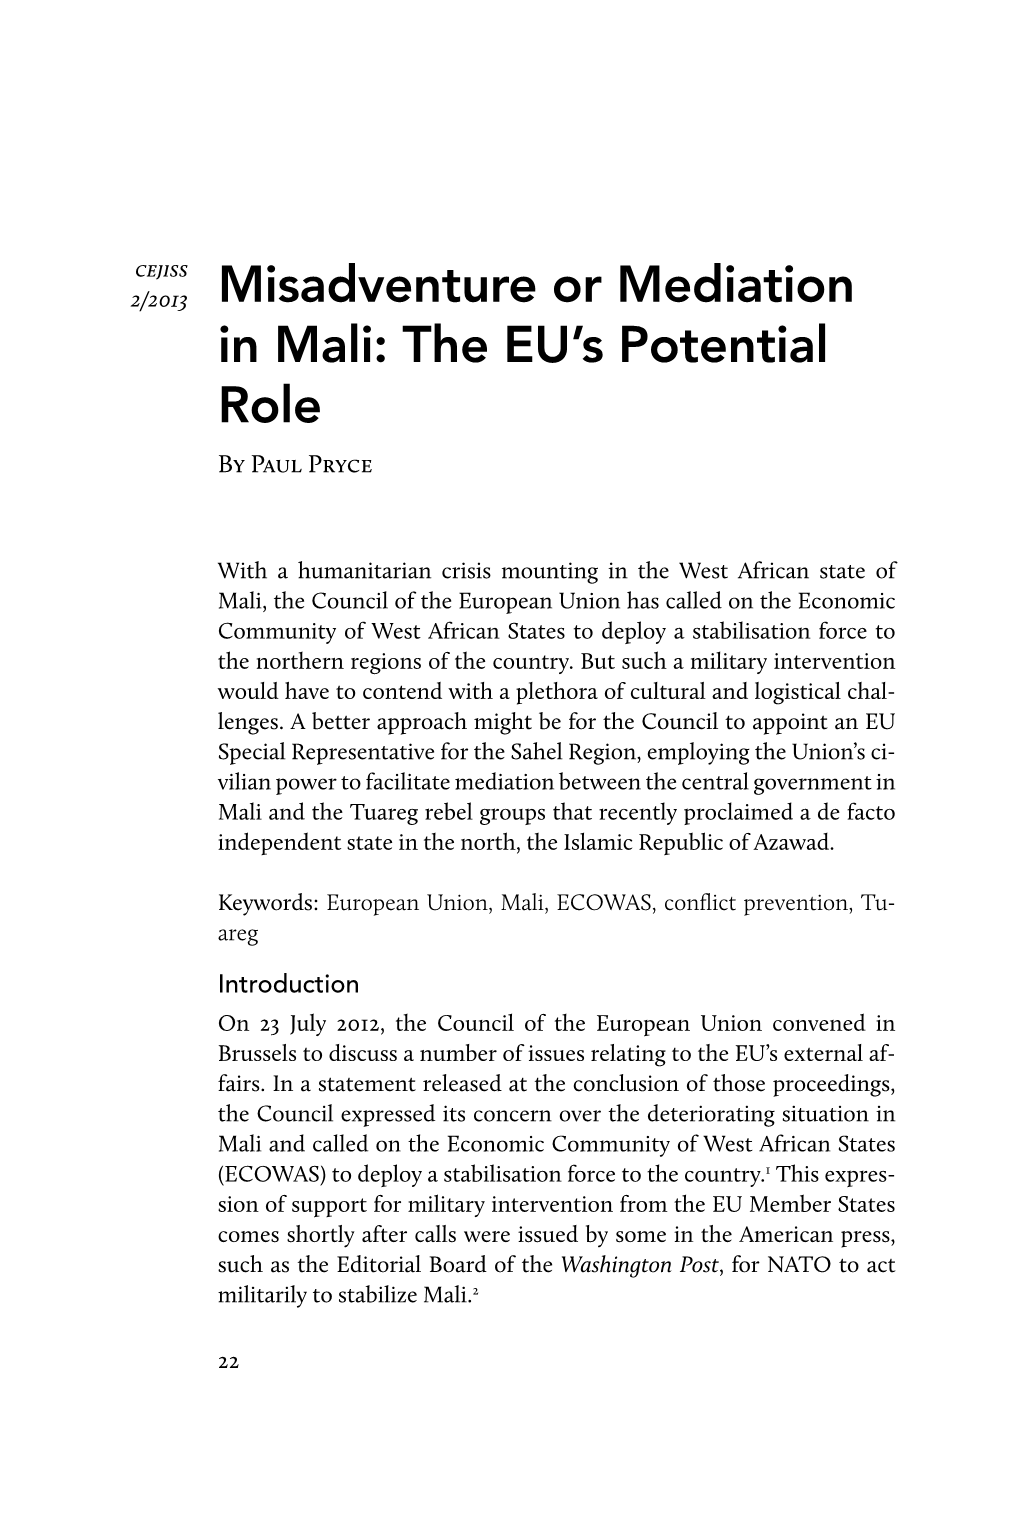 2/2013 Misadventure Or Mediation in Mali: the EU’S Potential Role by Paul Pryce